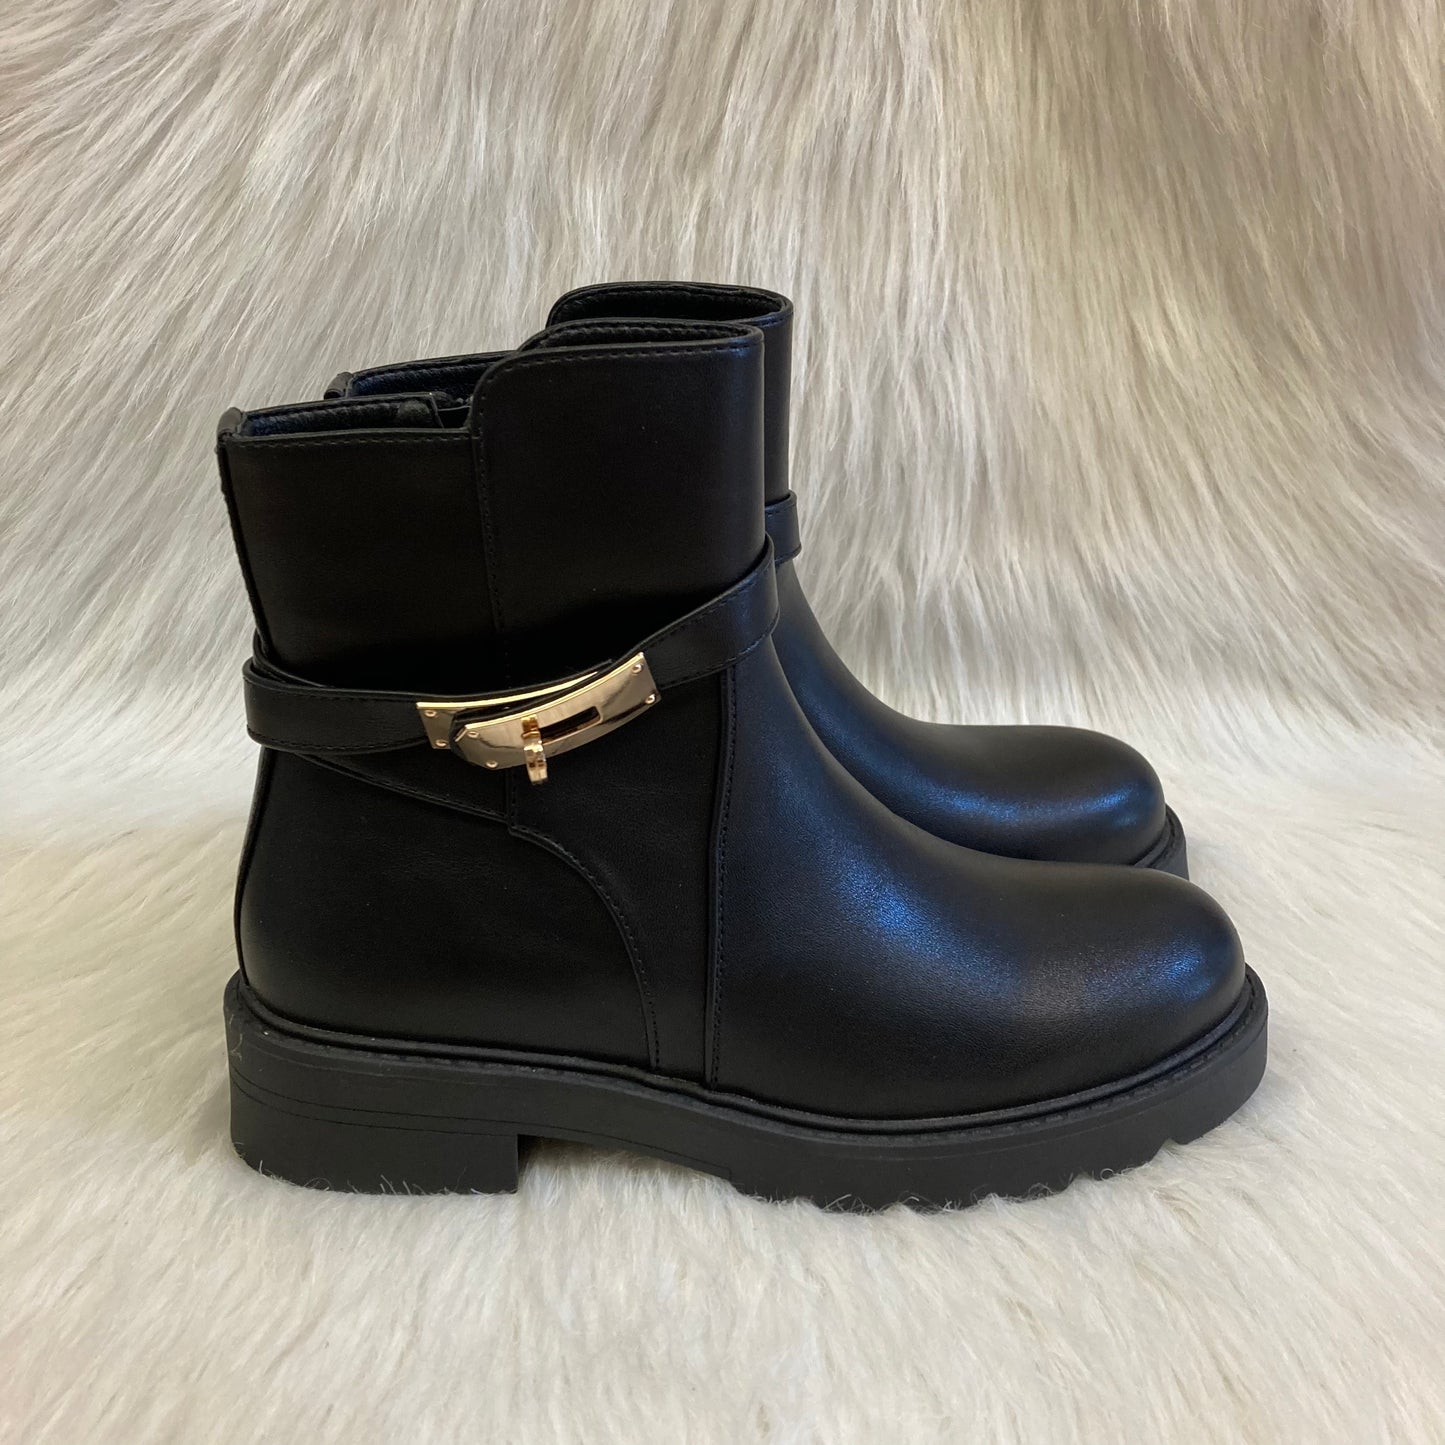 Black ankle boot with accessory